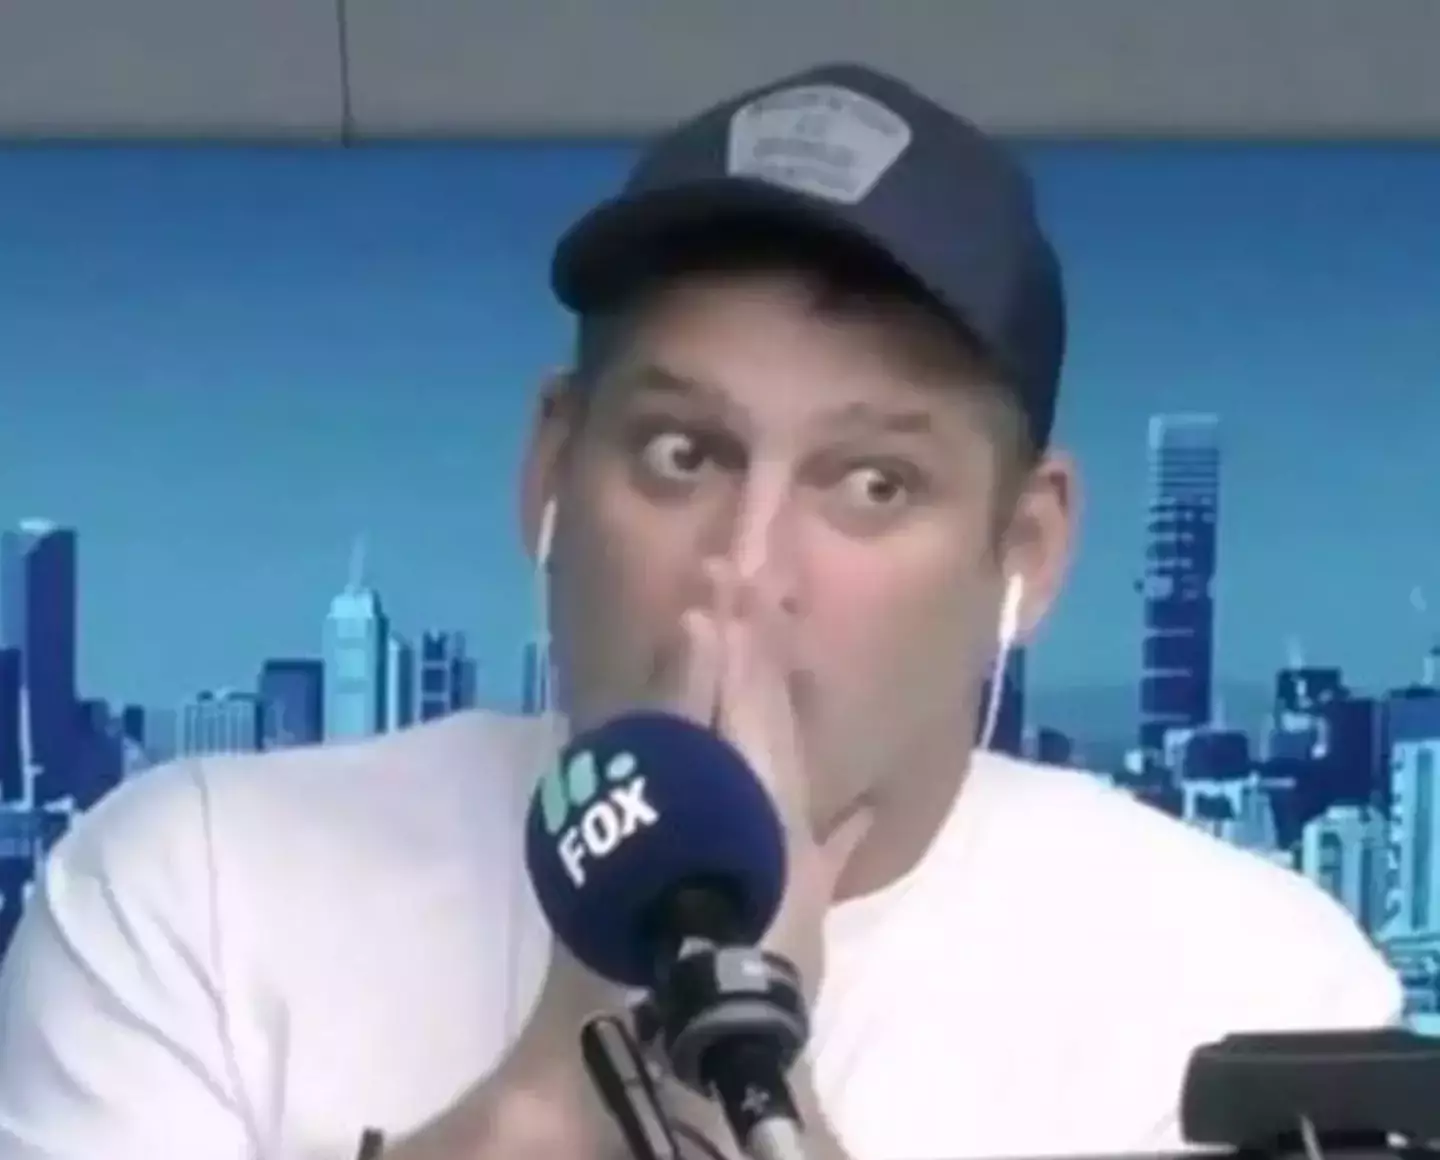 When you have a proposal live on your radio show and it goes wrong.